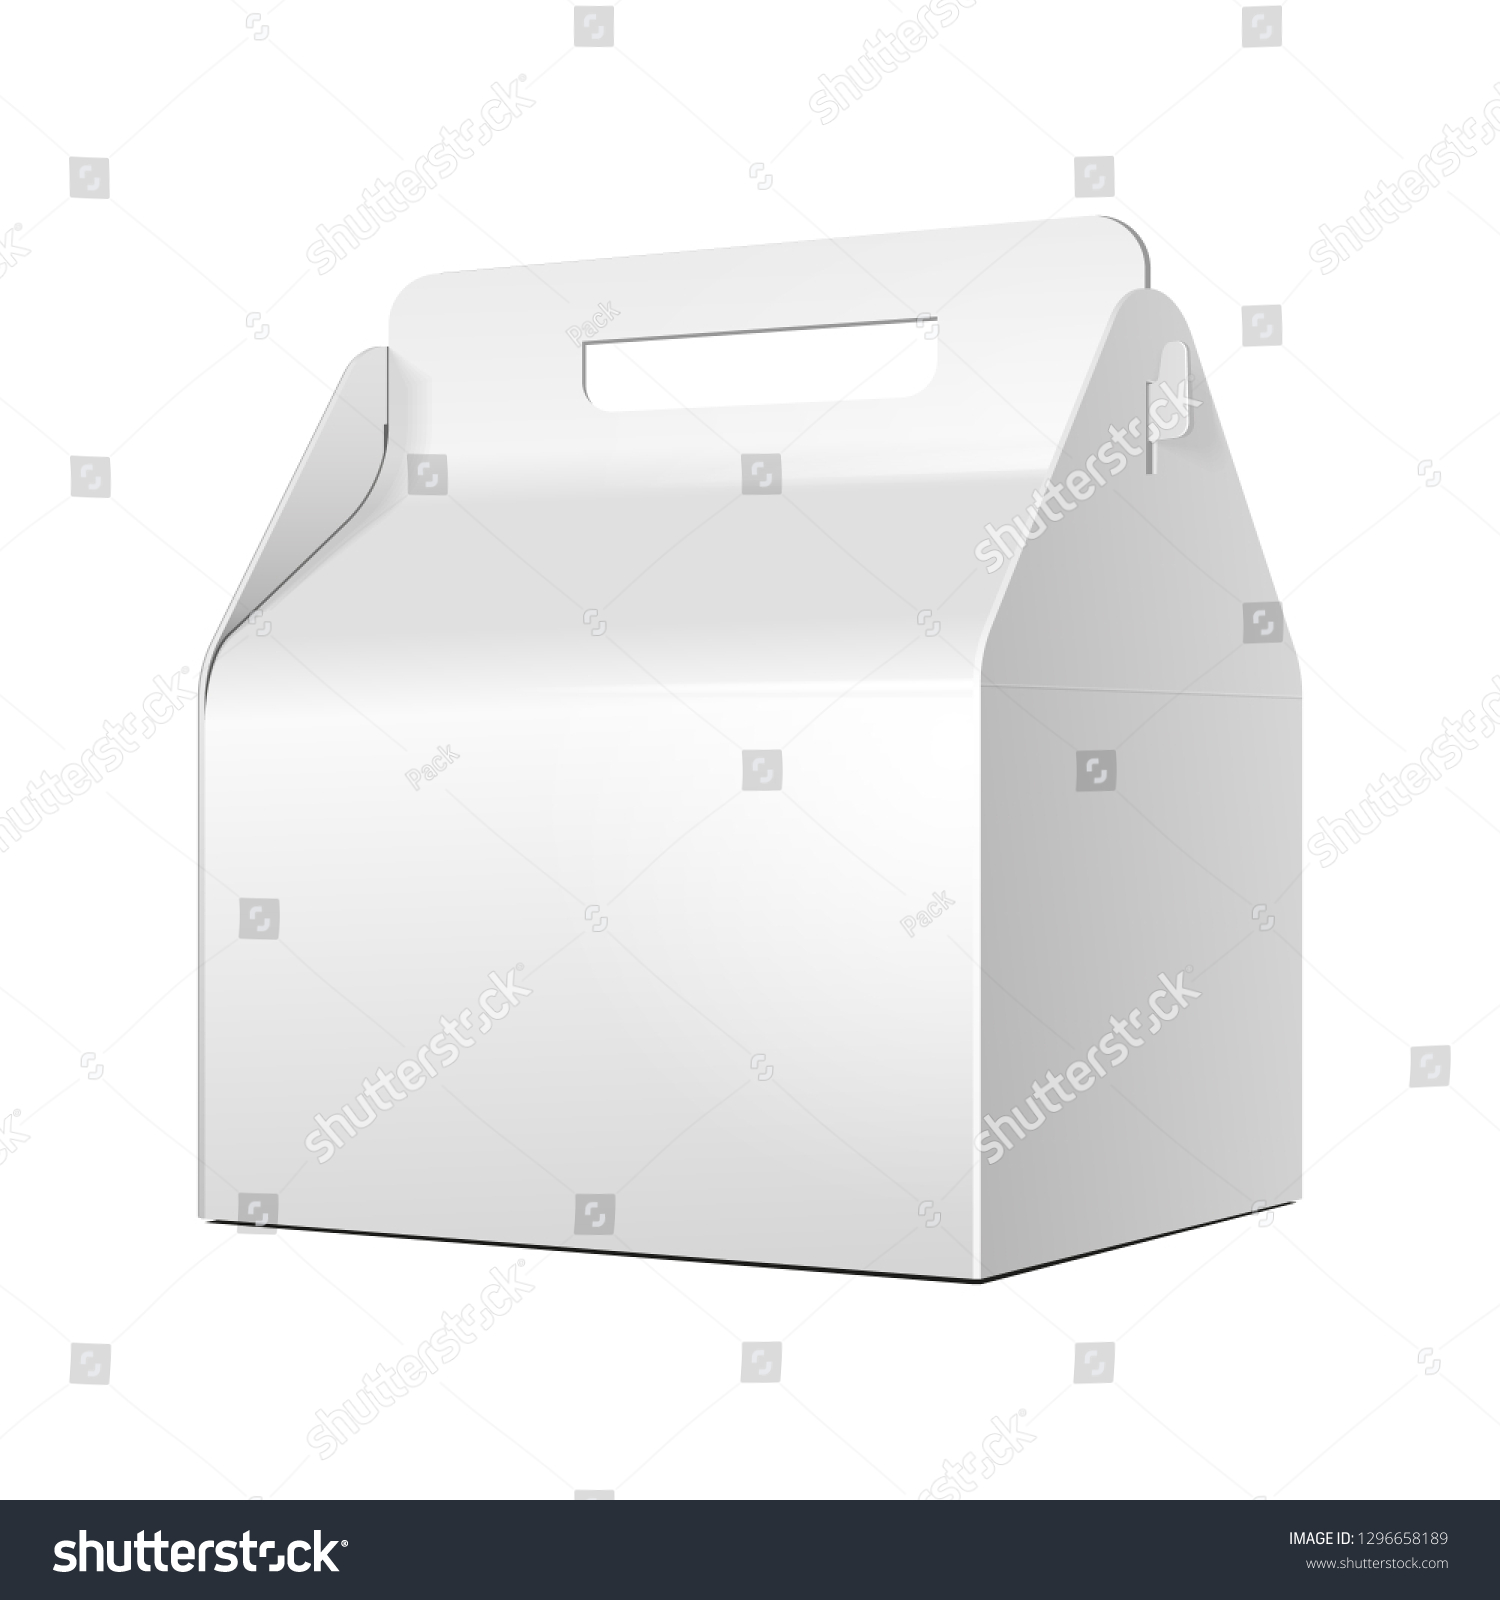 Mockup Cardboard Carry Packaging Box For Fast Food Meal, Candy, Cookies, Gift Or Other Products. Illustration Isolated On White Background. Mock Up Template Ready For Your Design. Vector EPS10 #1296658189